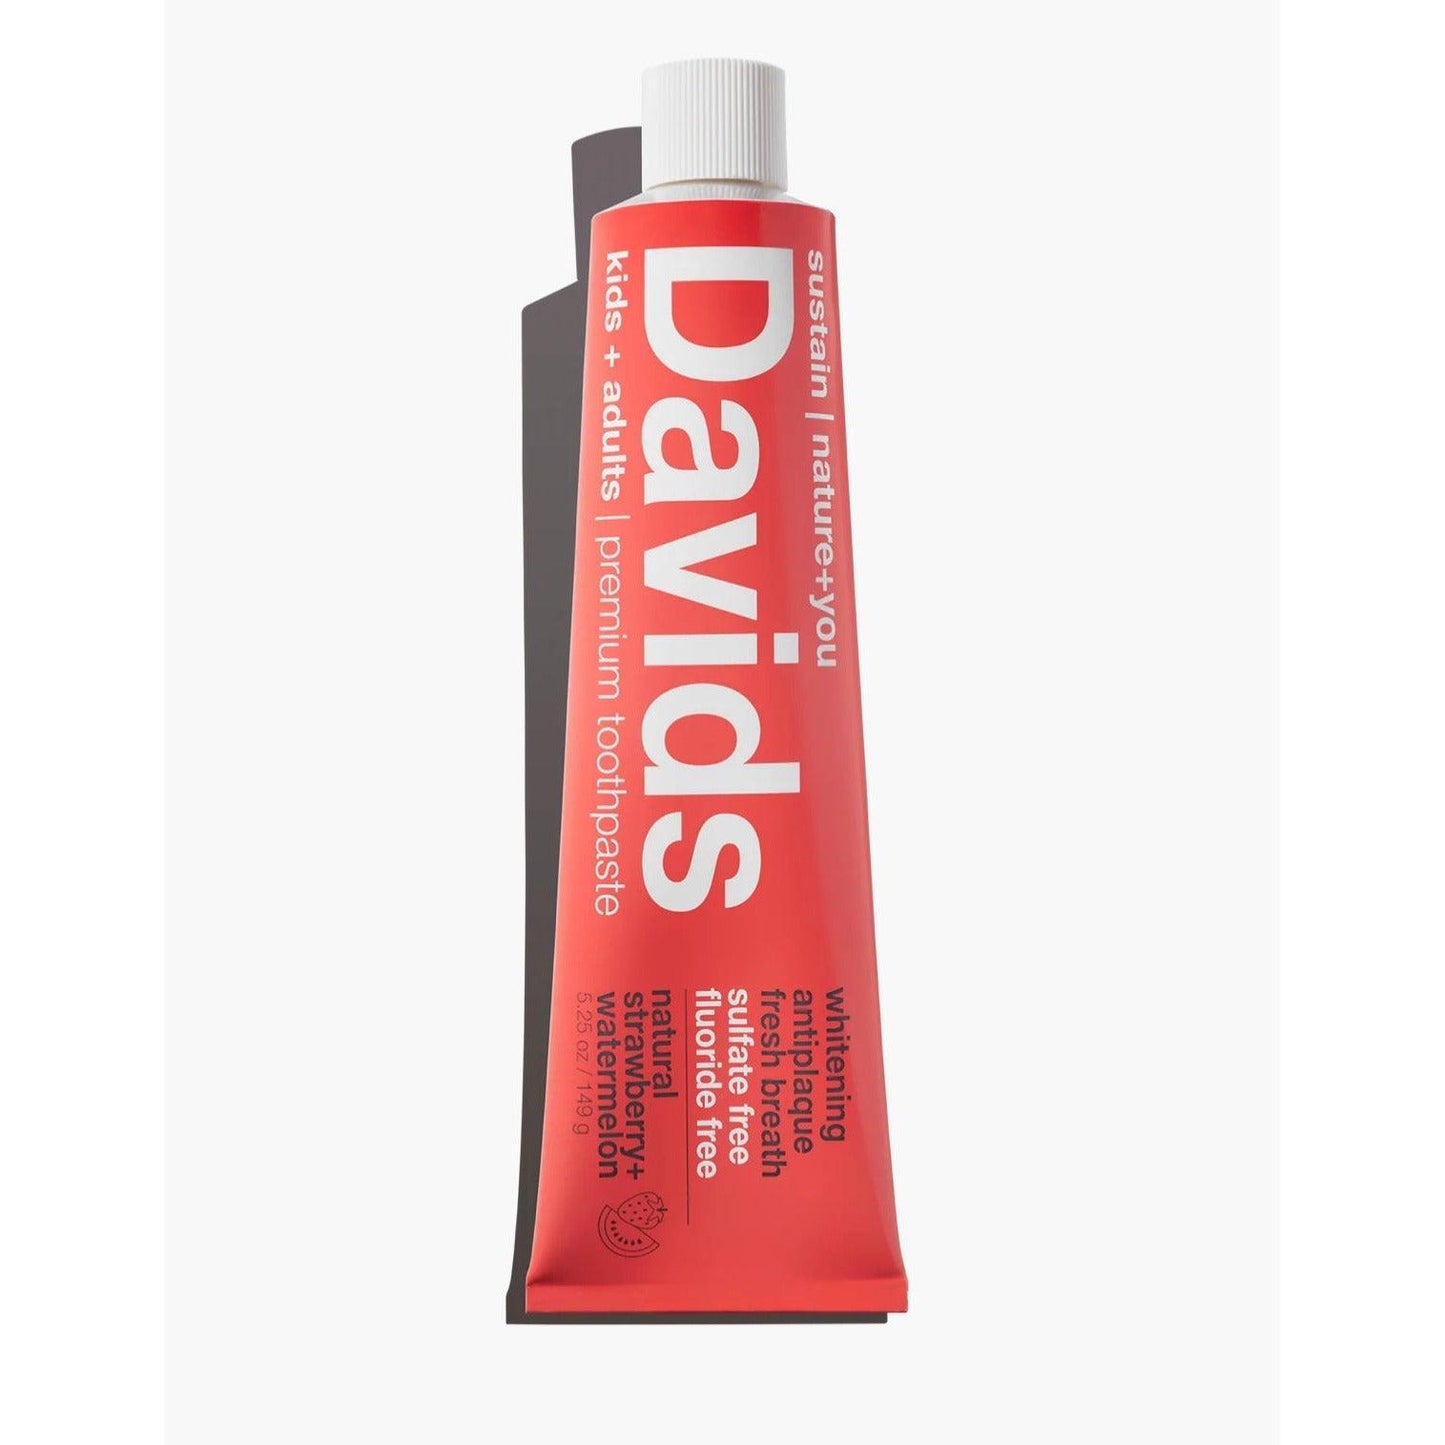 Kids' Natural Toothpaste - Davids Kids + Adults Strawberry Watermelon Premium Toothpaste - Ninth & Pine